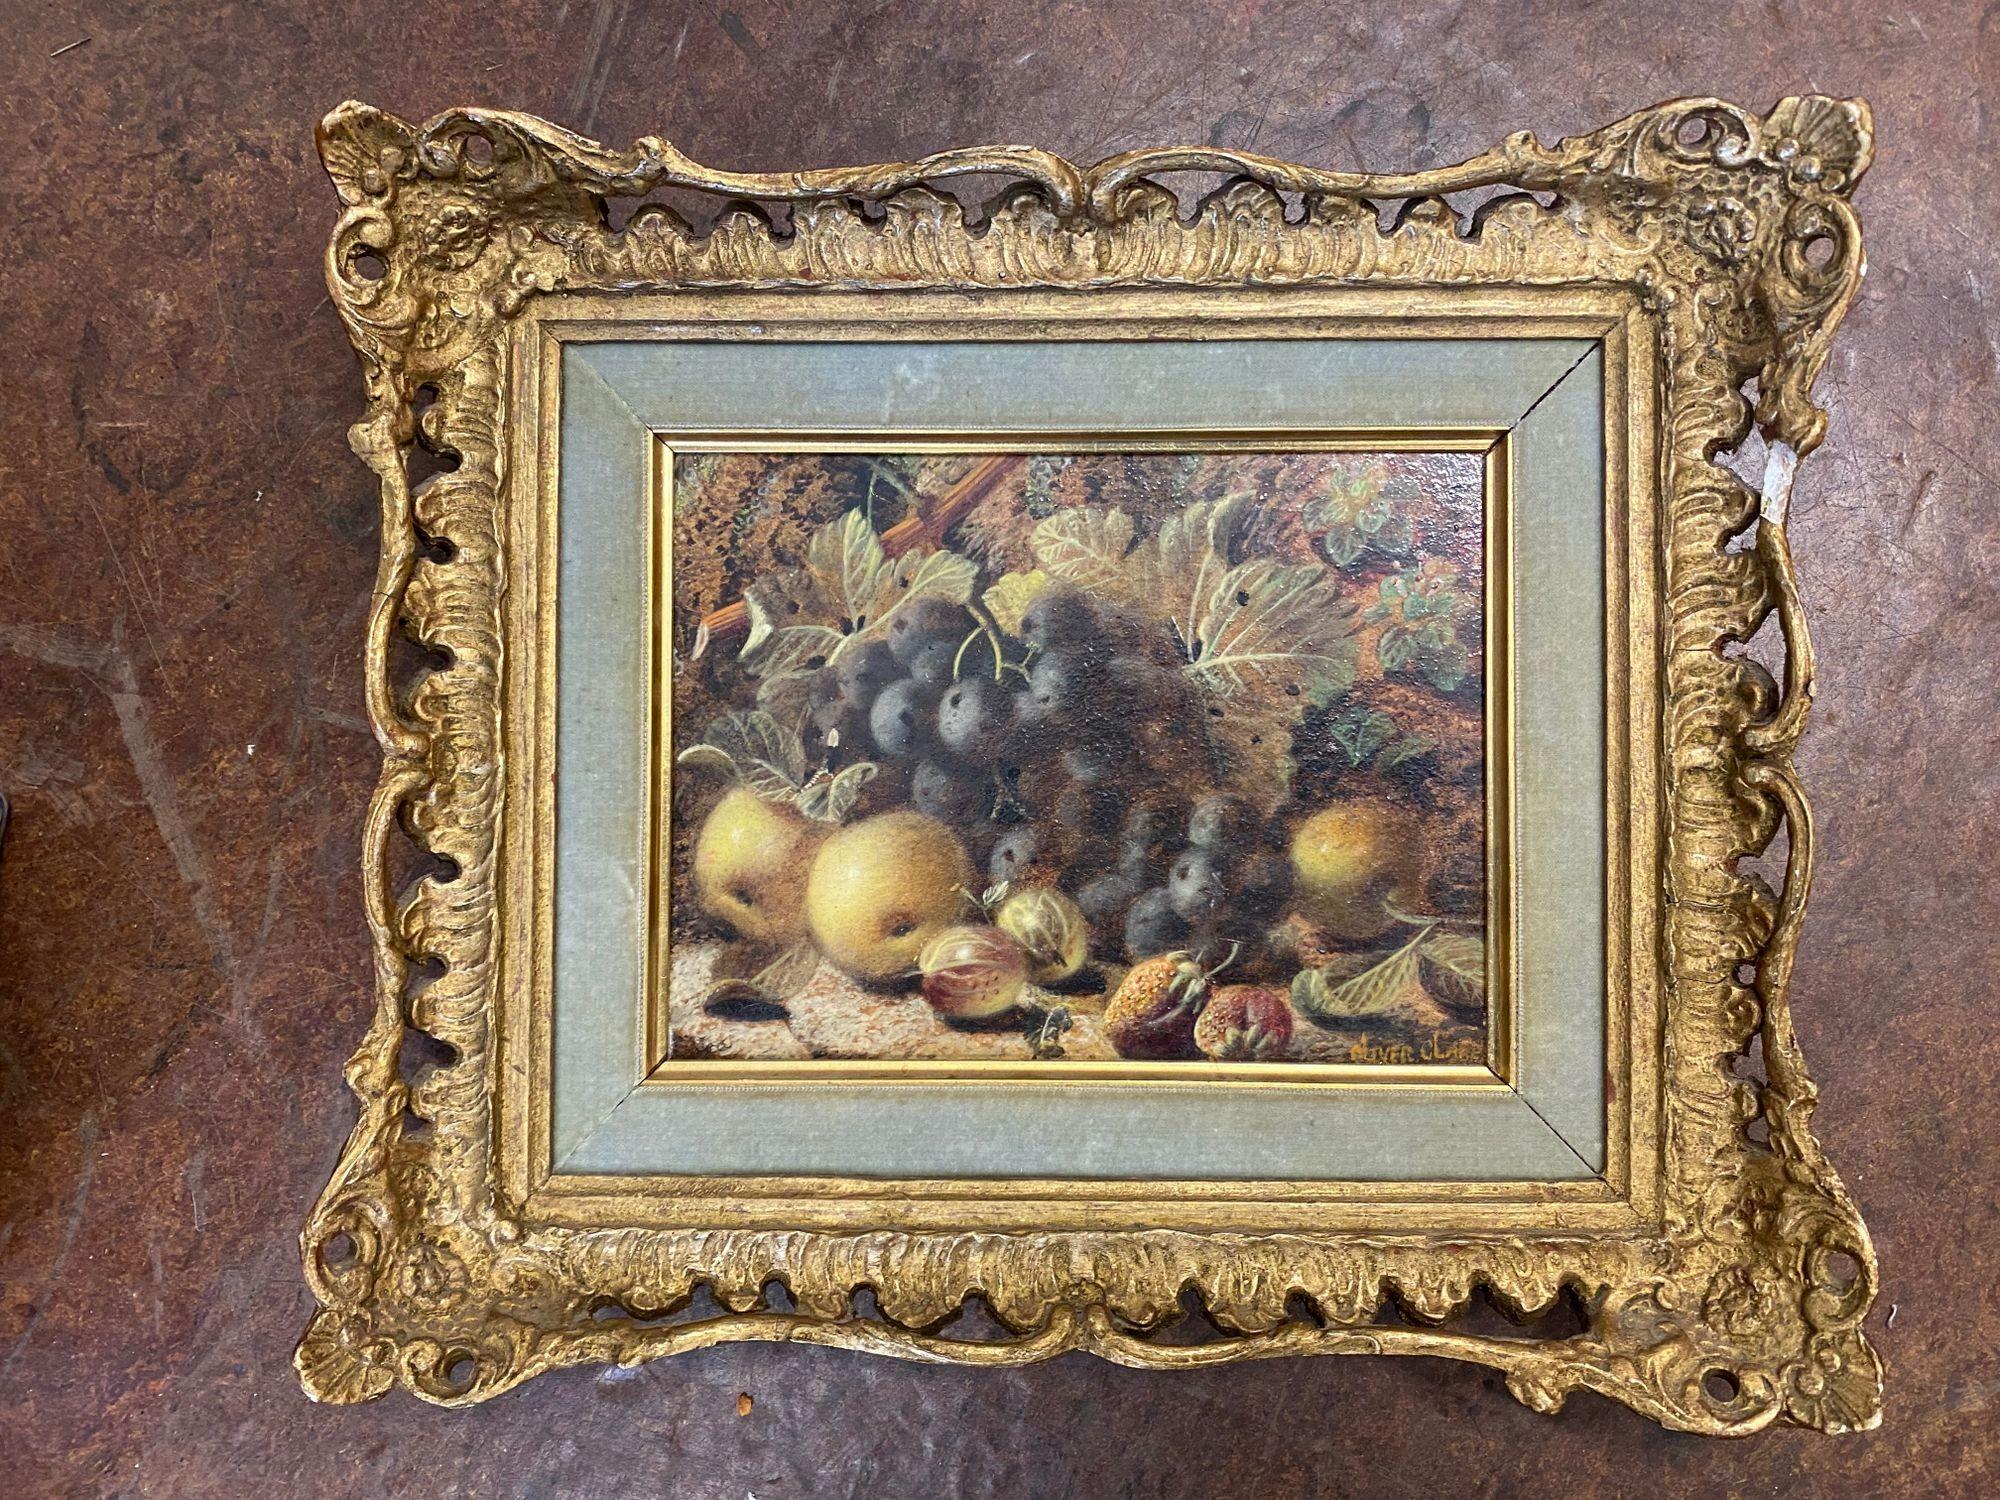 Oliver Clare (British, 1853-1927)
Pair of Still life oil paintings on board, each signed ‘Oliver Clare’
Set in gilded gesso frames.